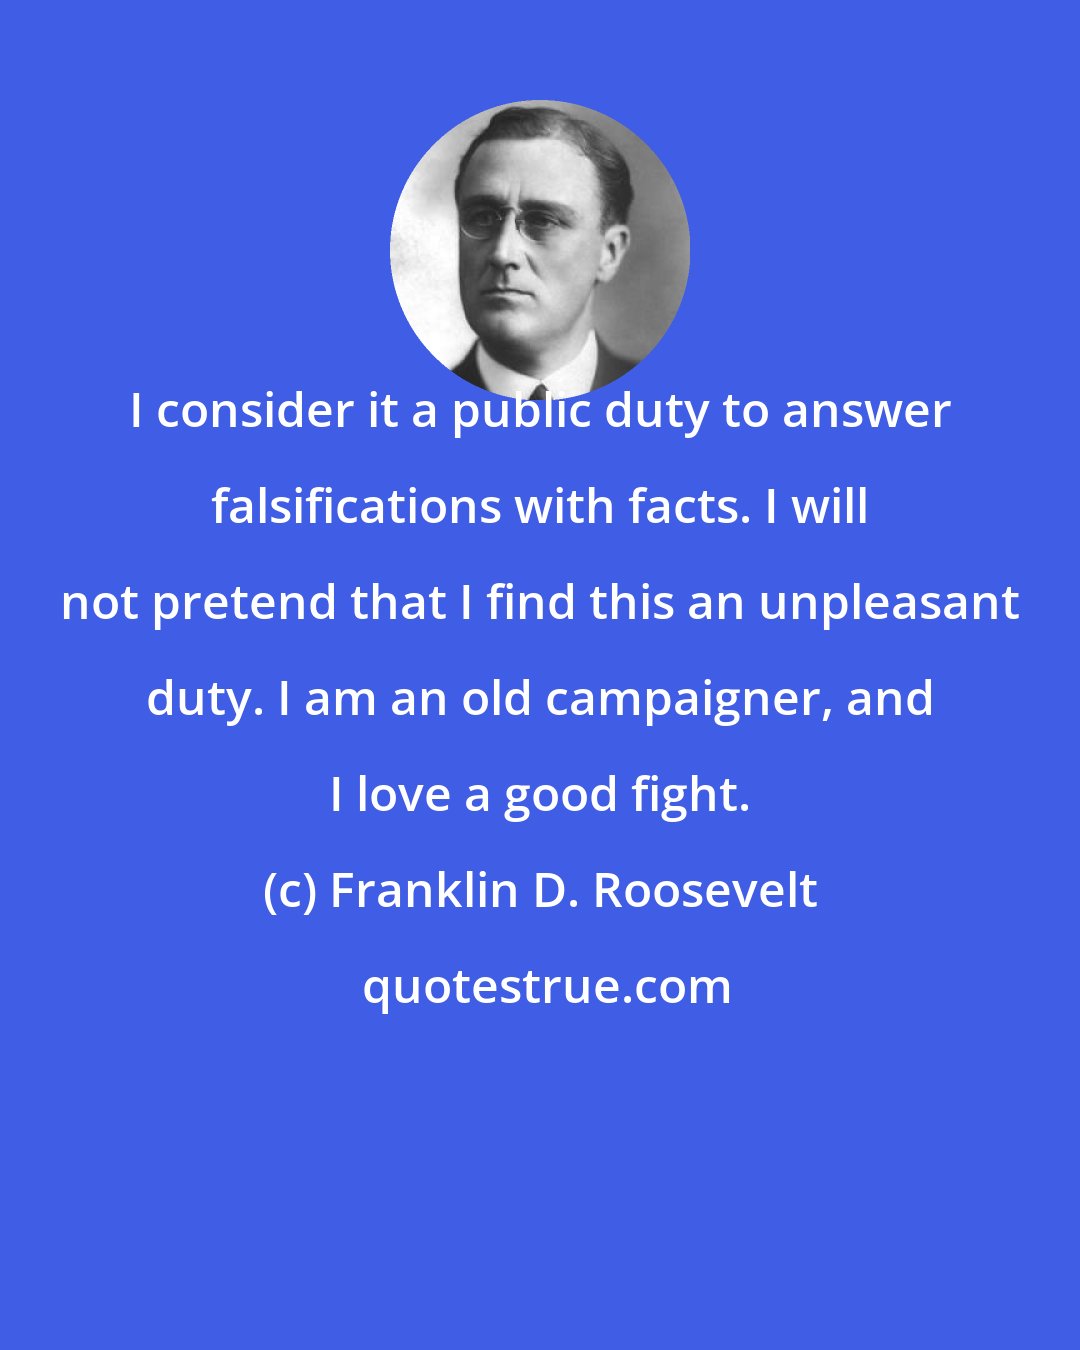 Franklin D. Roosevelt: I consider it a public duty to answer falsifications with facts. I will not pretend that I find this an unpleasant duty. I am an old campaigner, and I love a good fight.